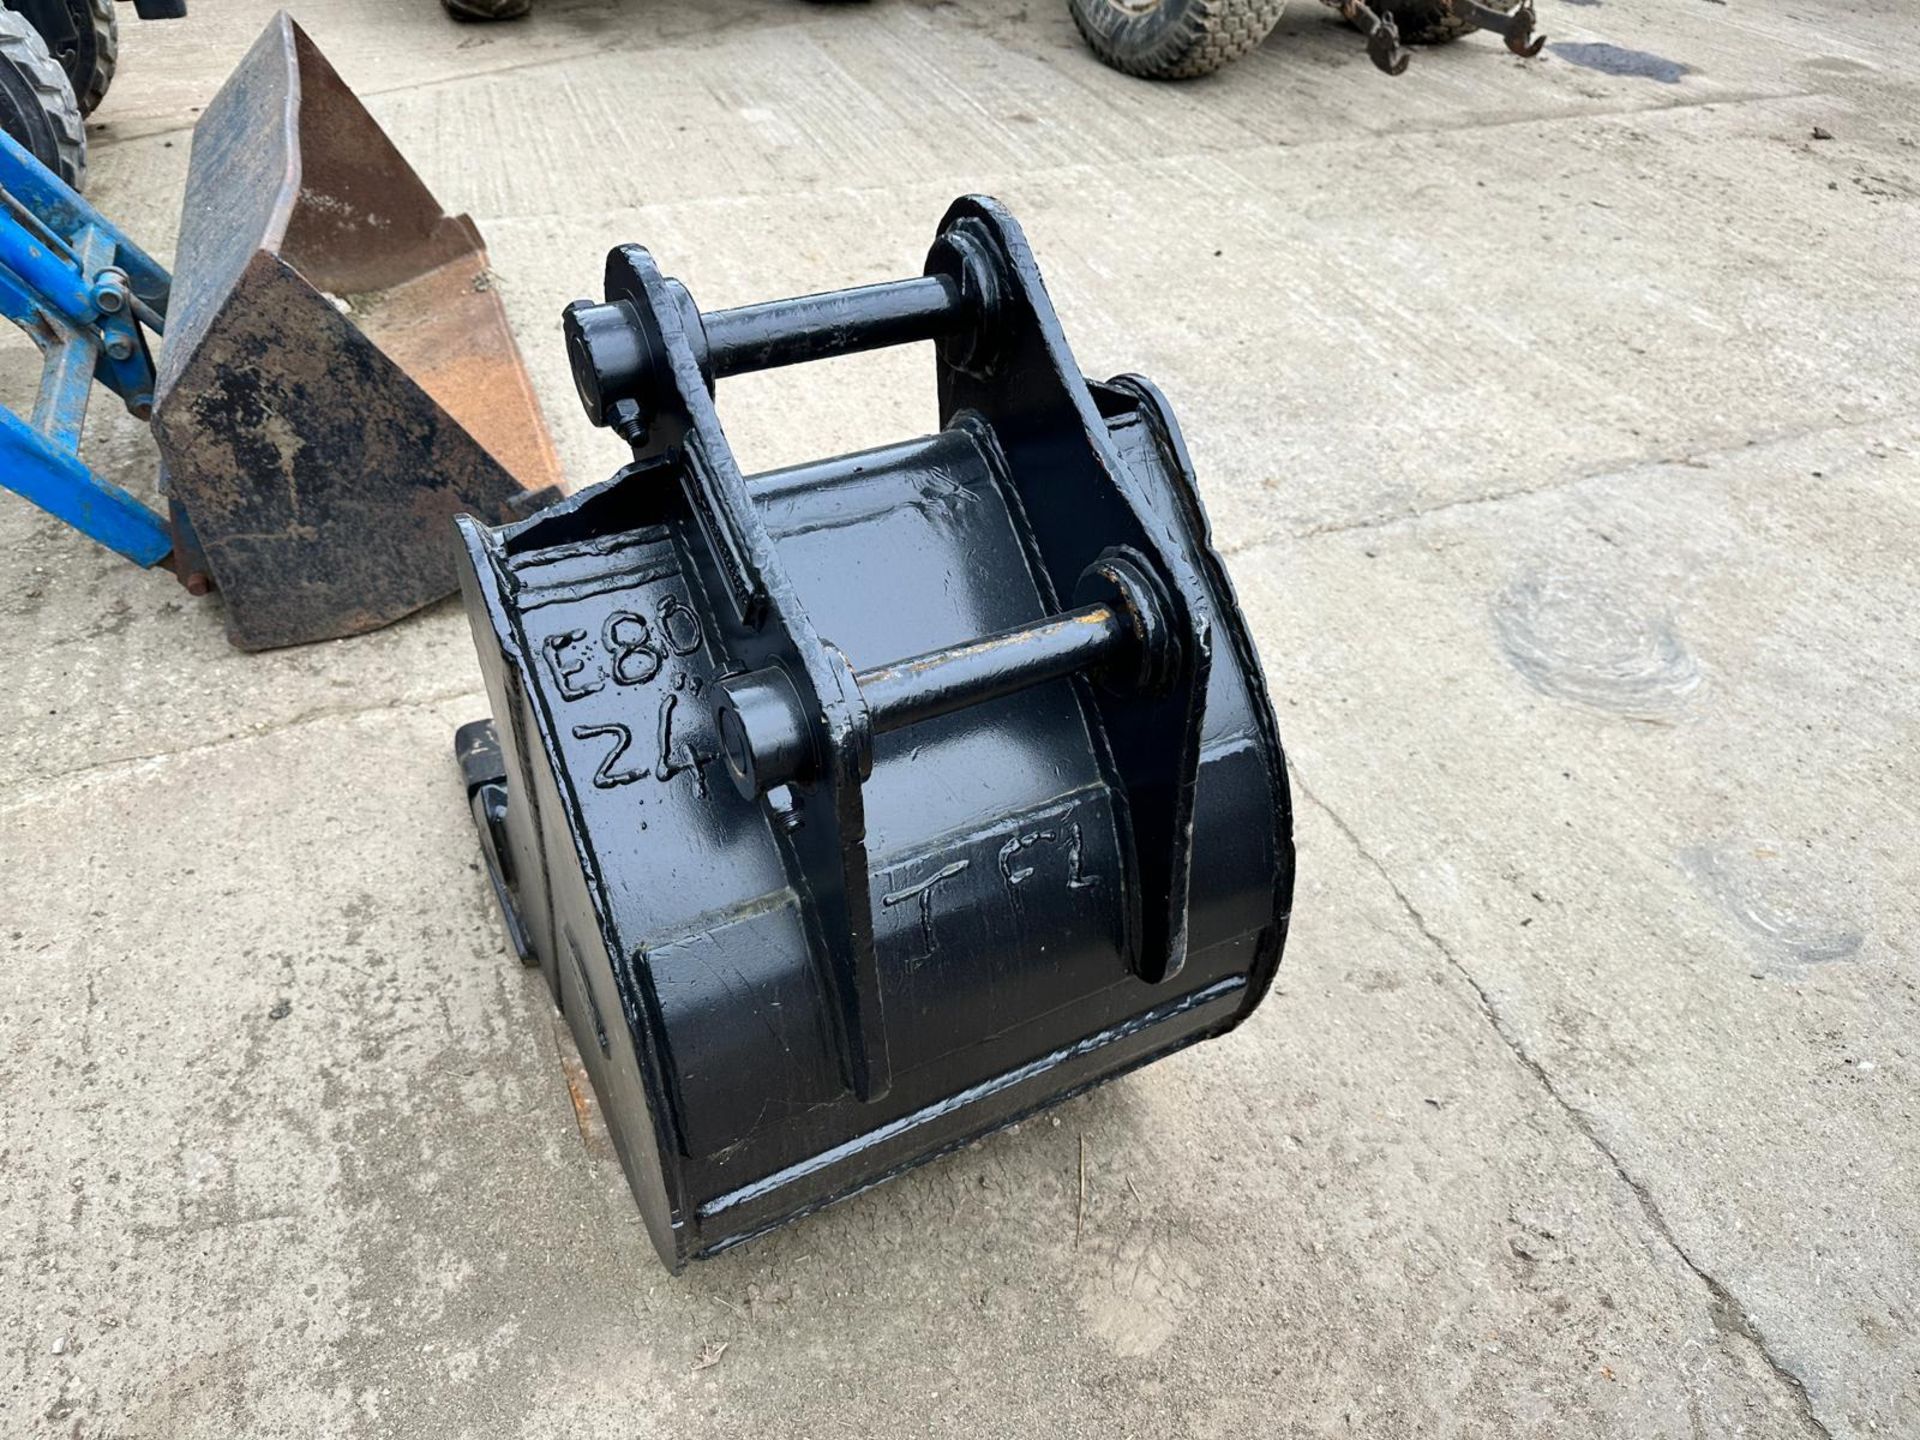 Strickland 24” Digging Bucket With Teeth, Came Of Bobcat E80, Brand New Teeth *PLUS VAT* - Image 8 of 9